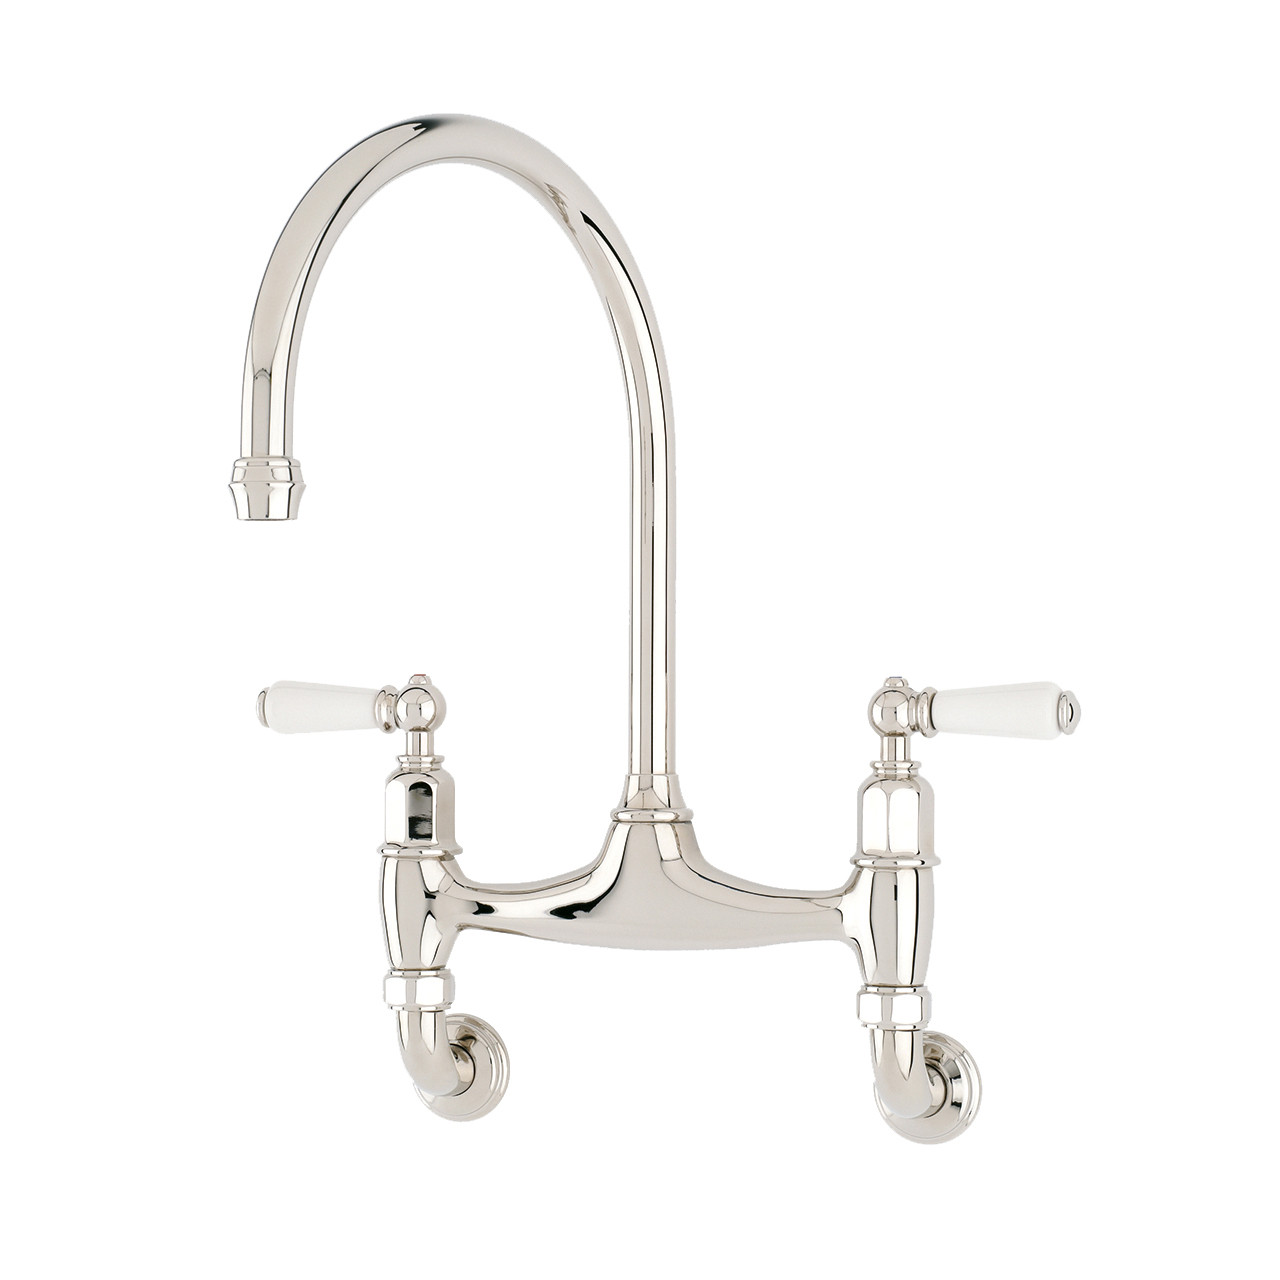 An image of Perrin & Rowe Ionian 4183 Kitchen Tap